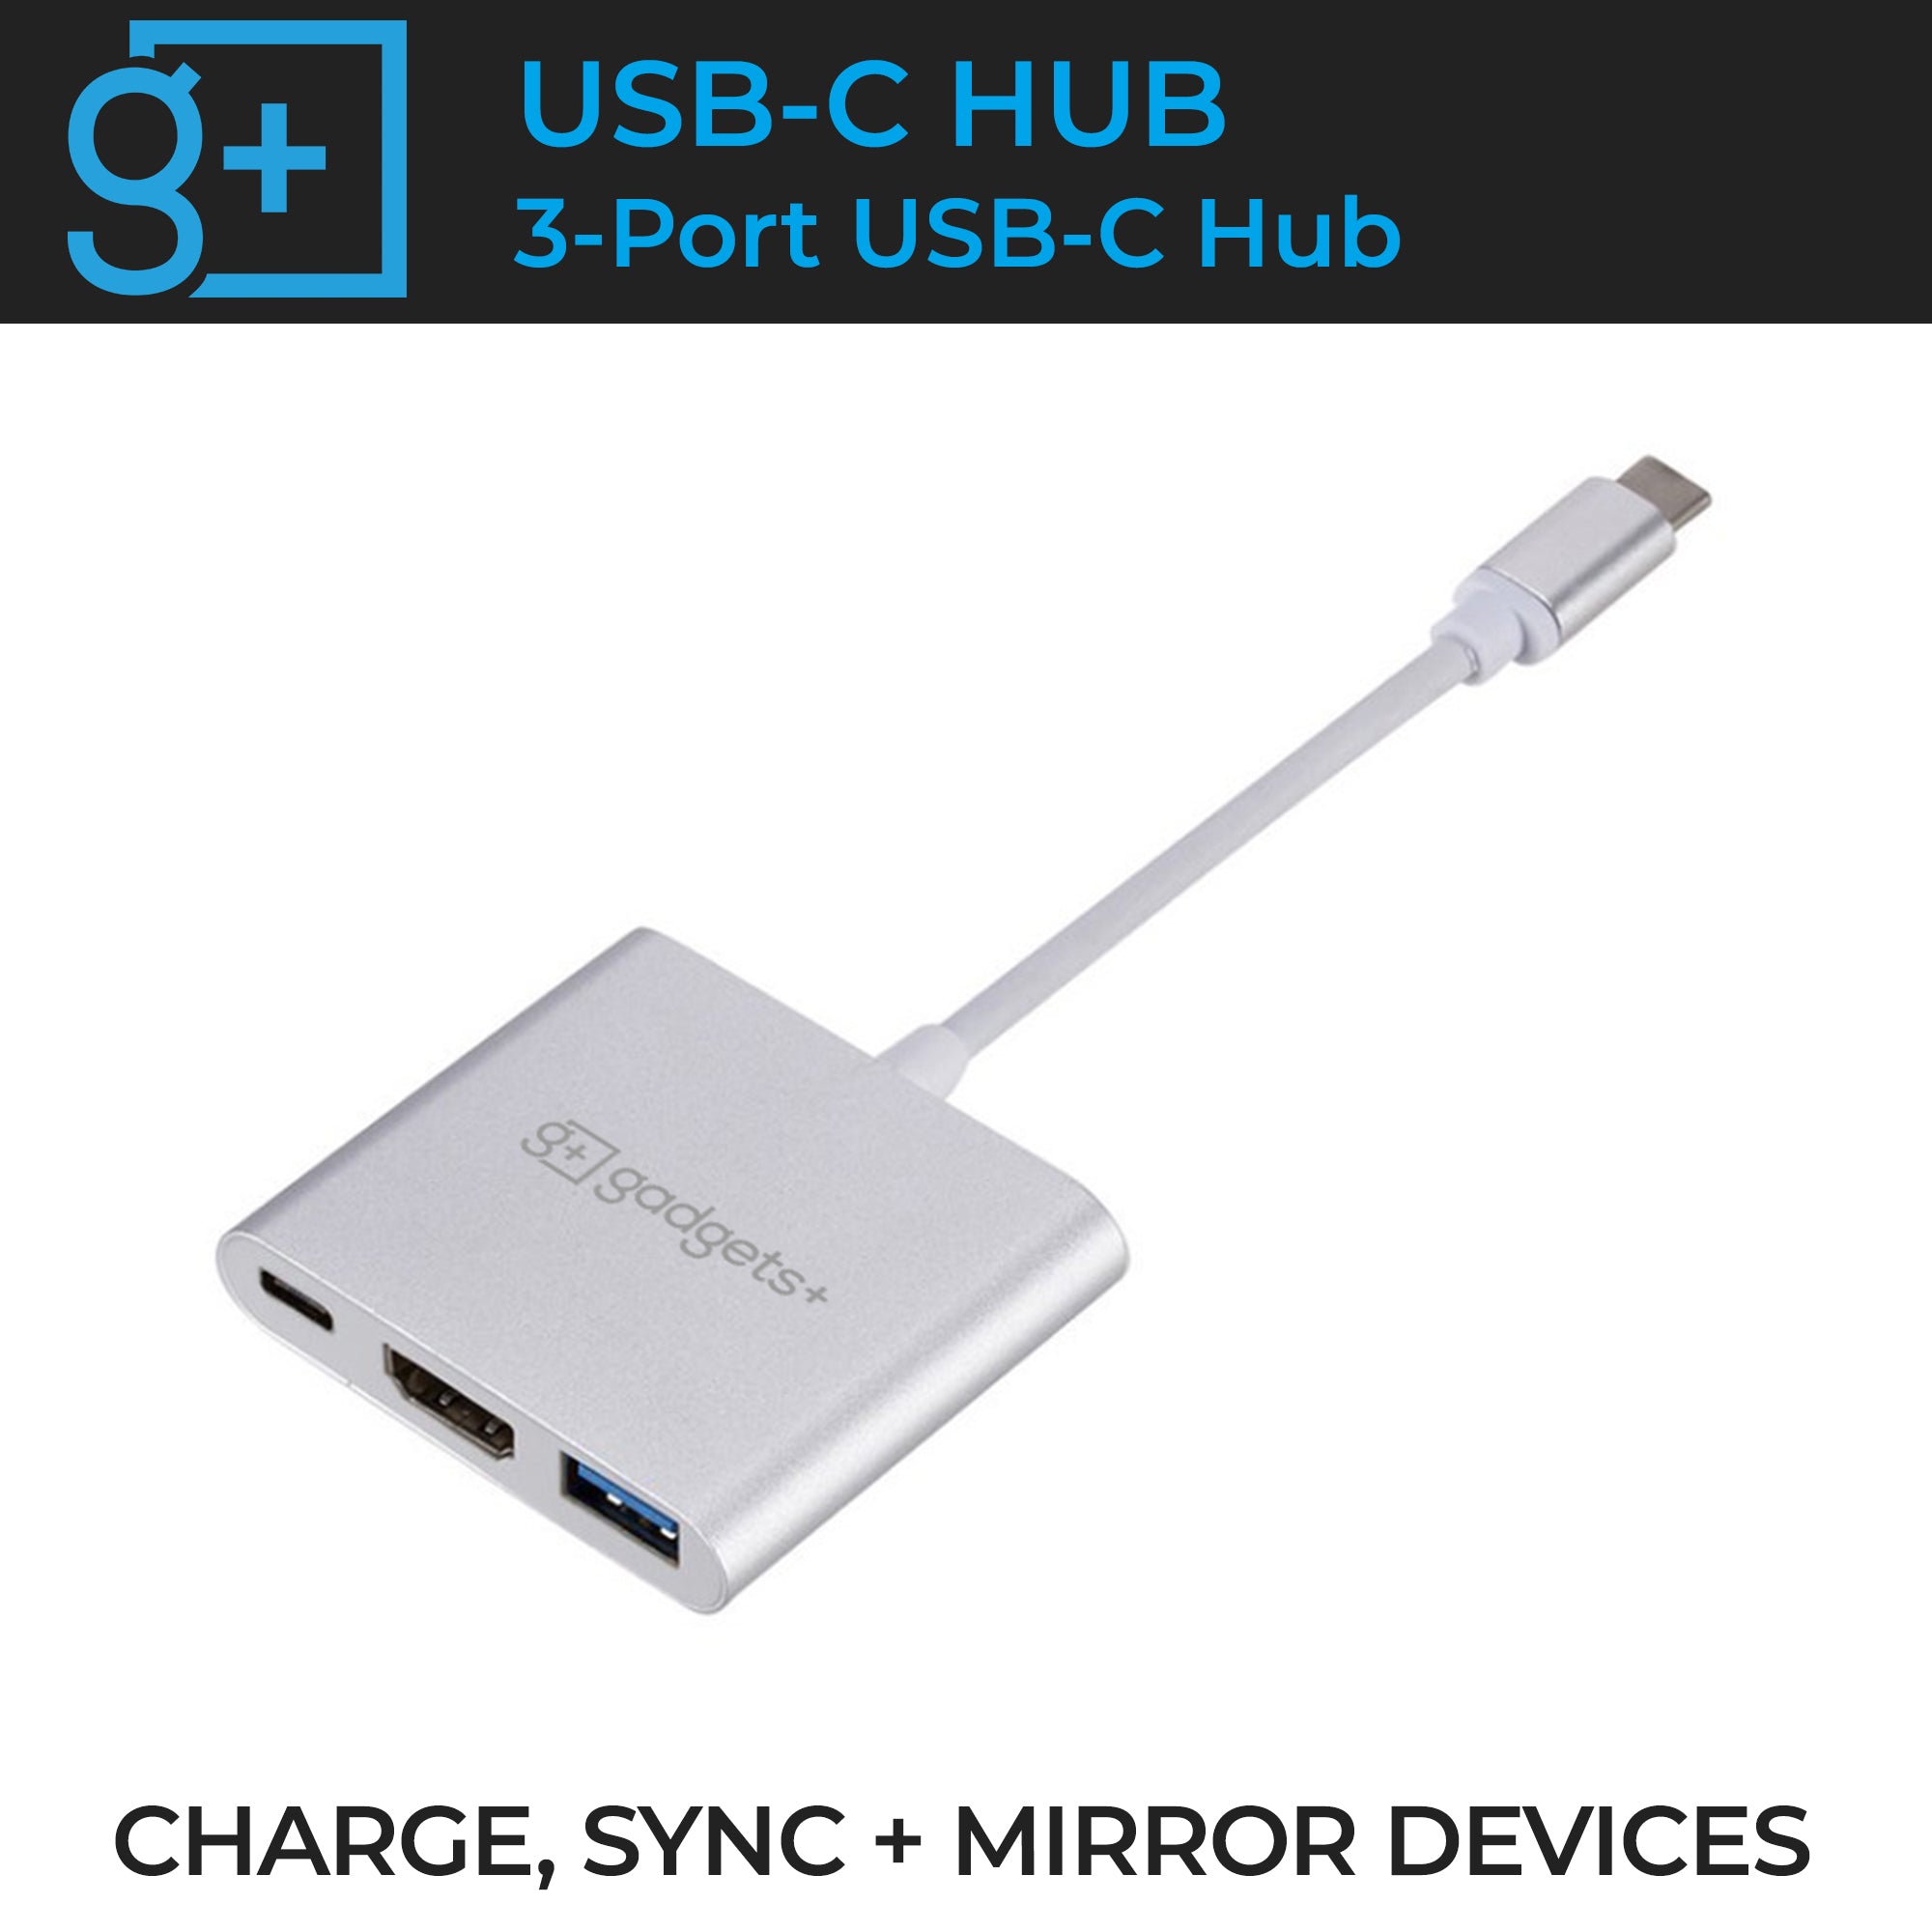 USB-C Hub has 3 ports to support charging, syncing and mirroring devices.